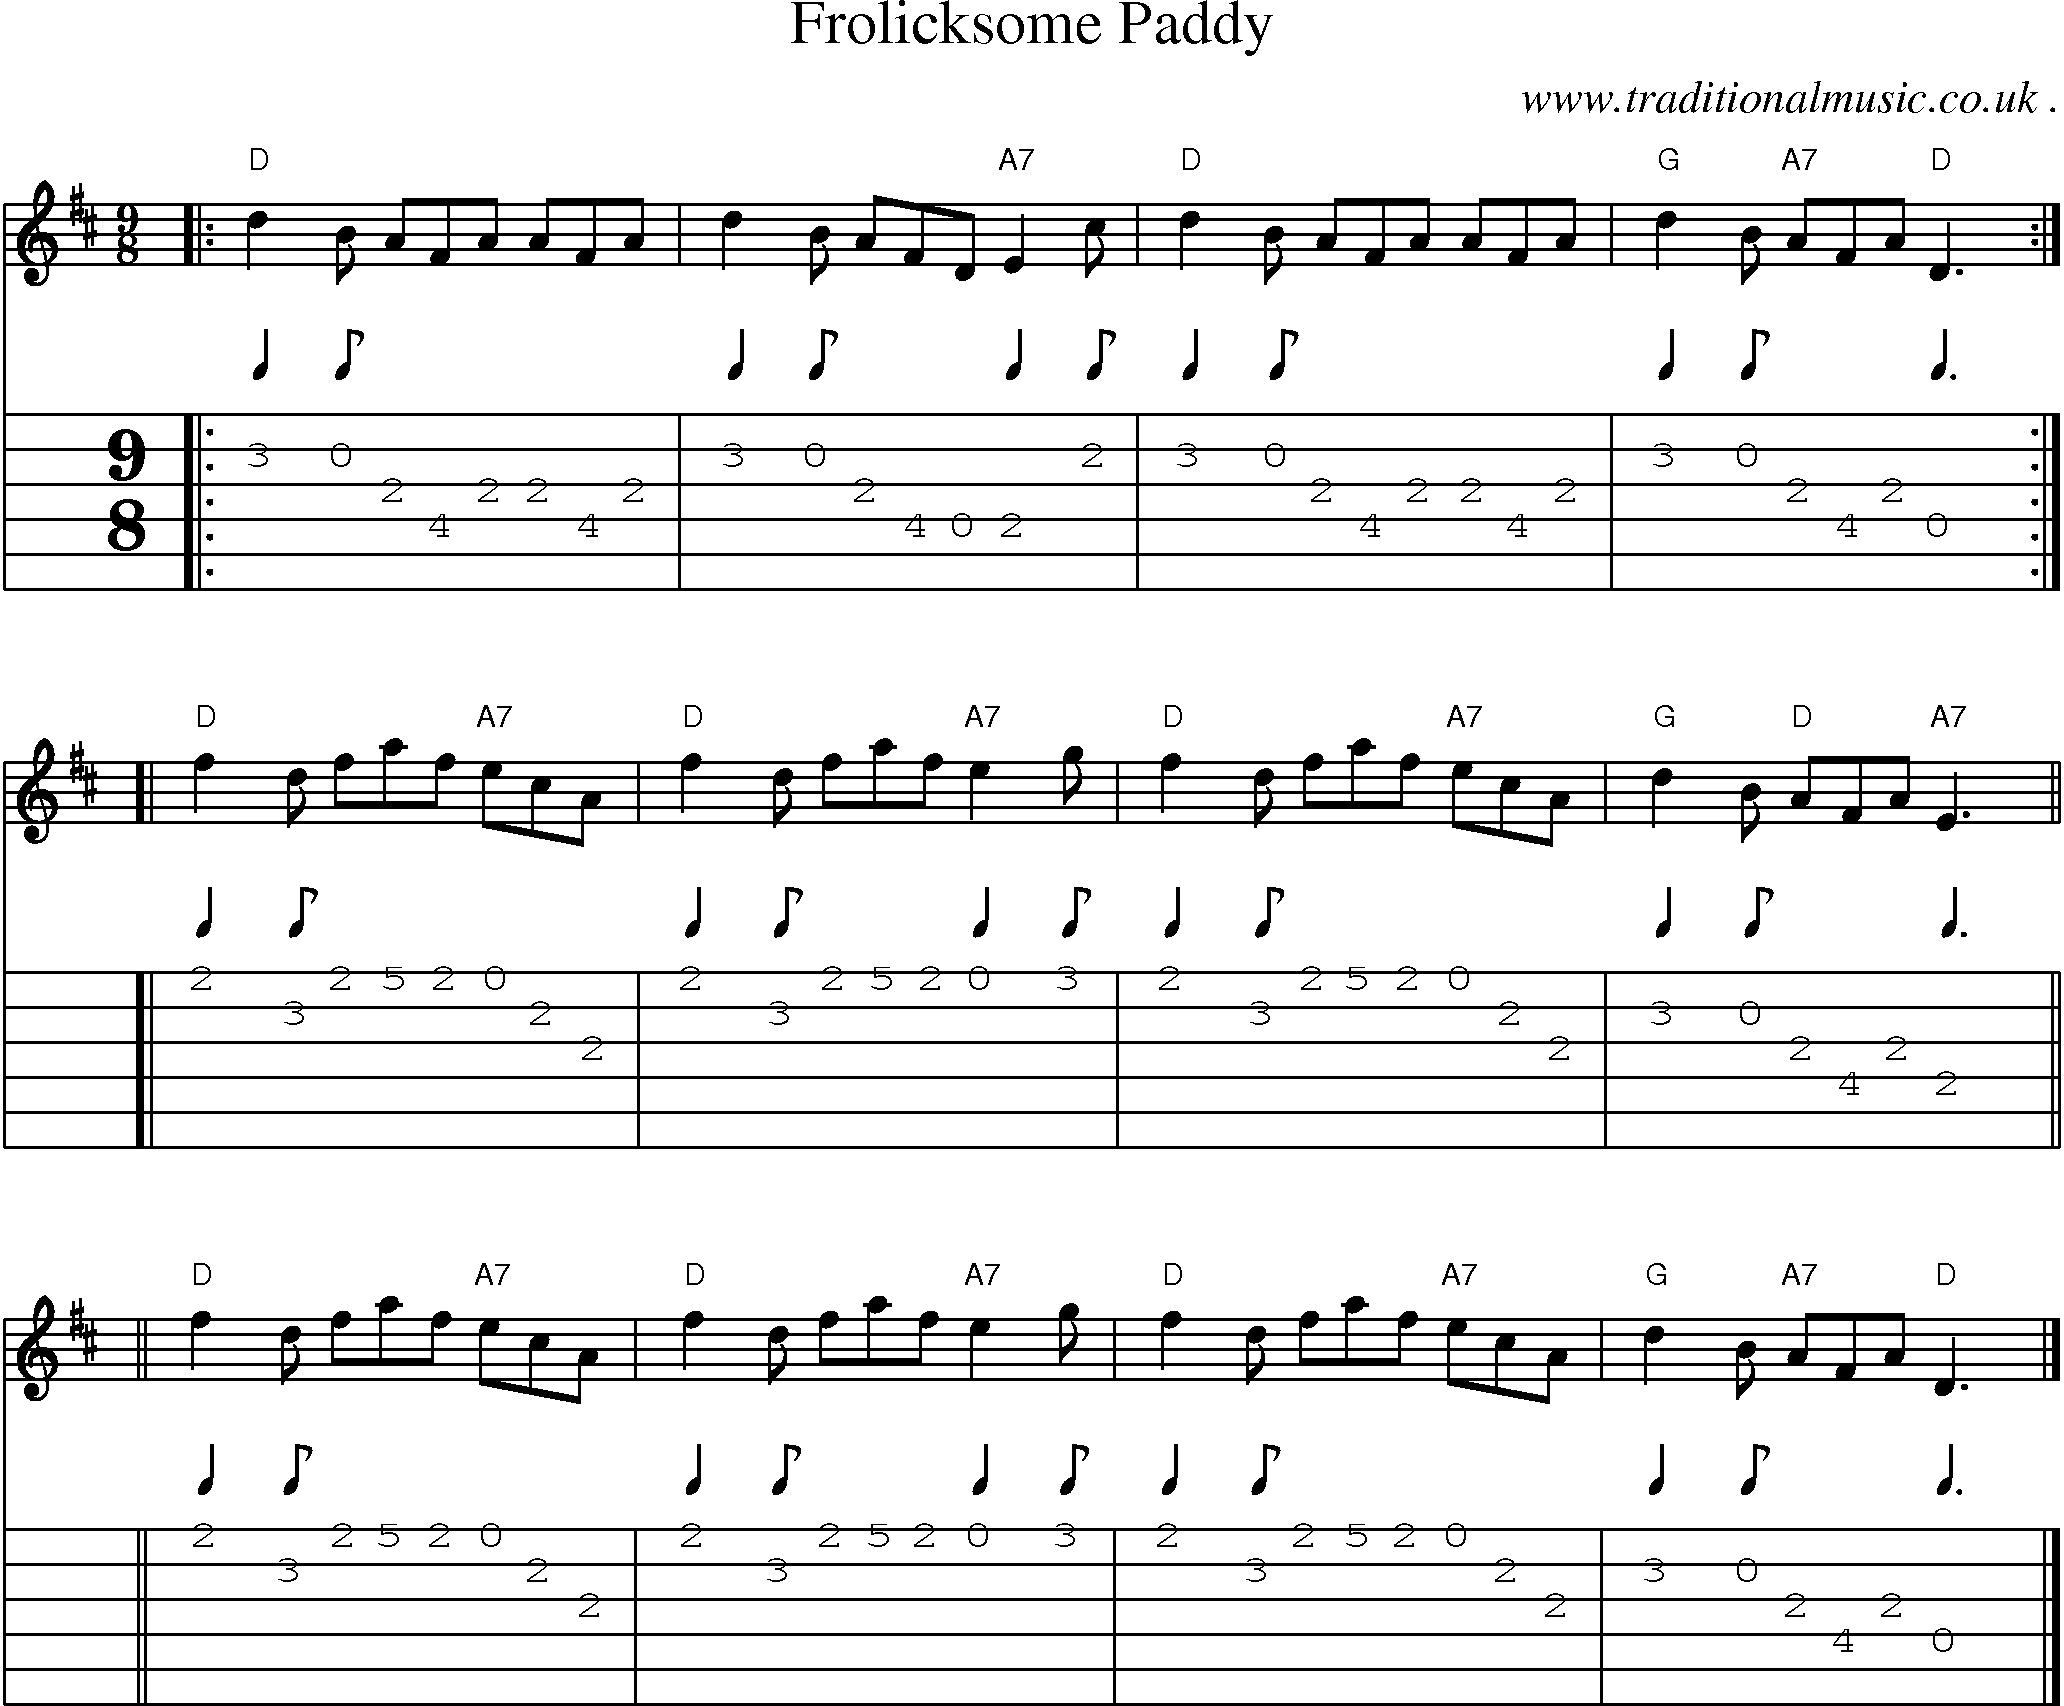 Sheet-music  score, Chords and Guitar Tabs for Frolicksome Paddy